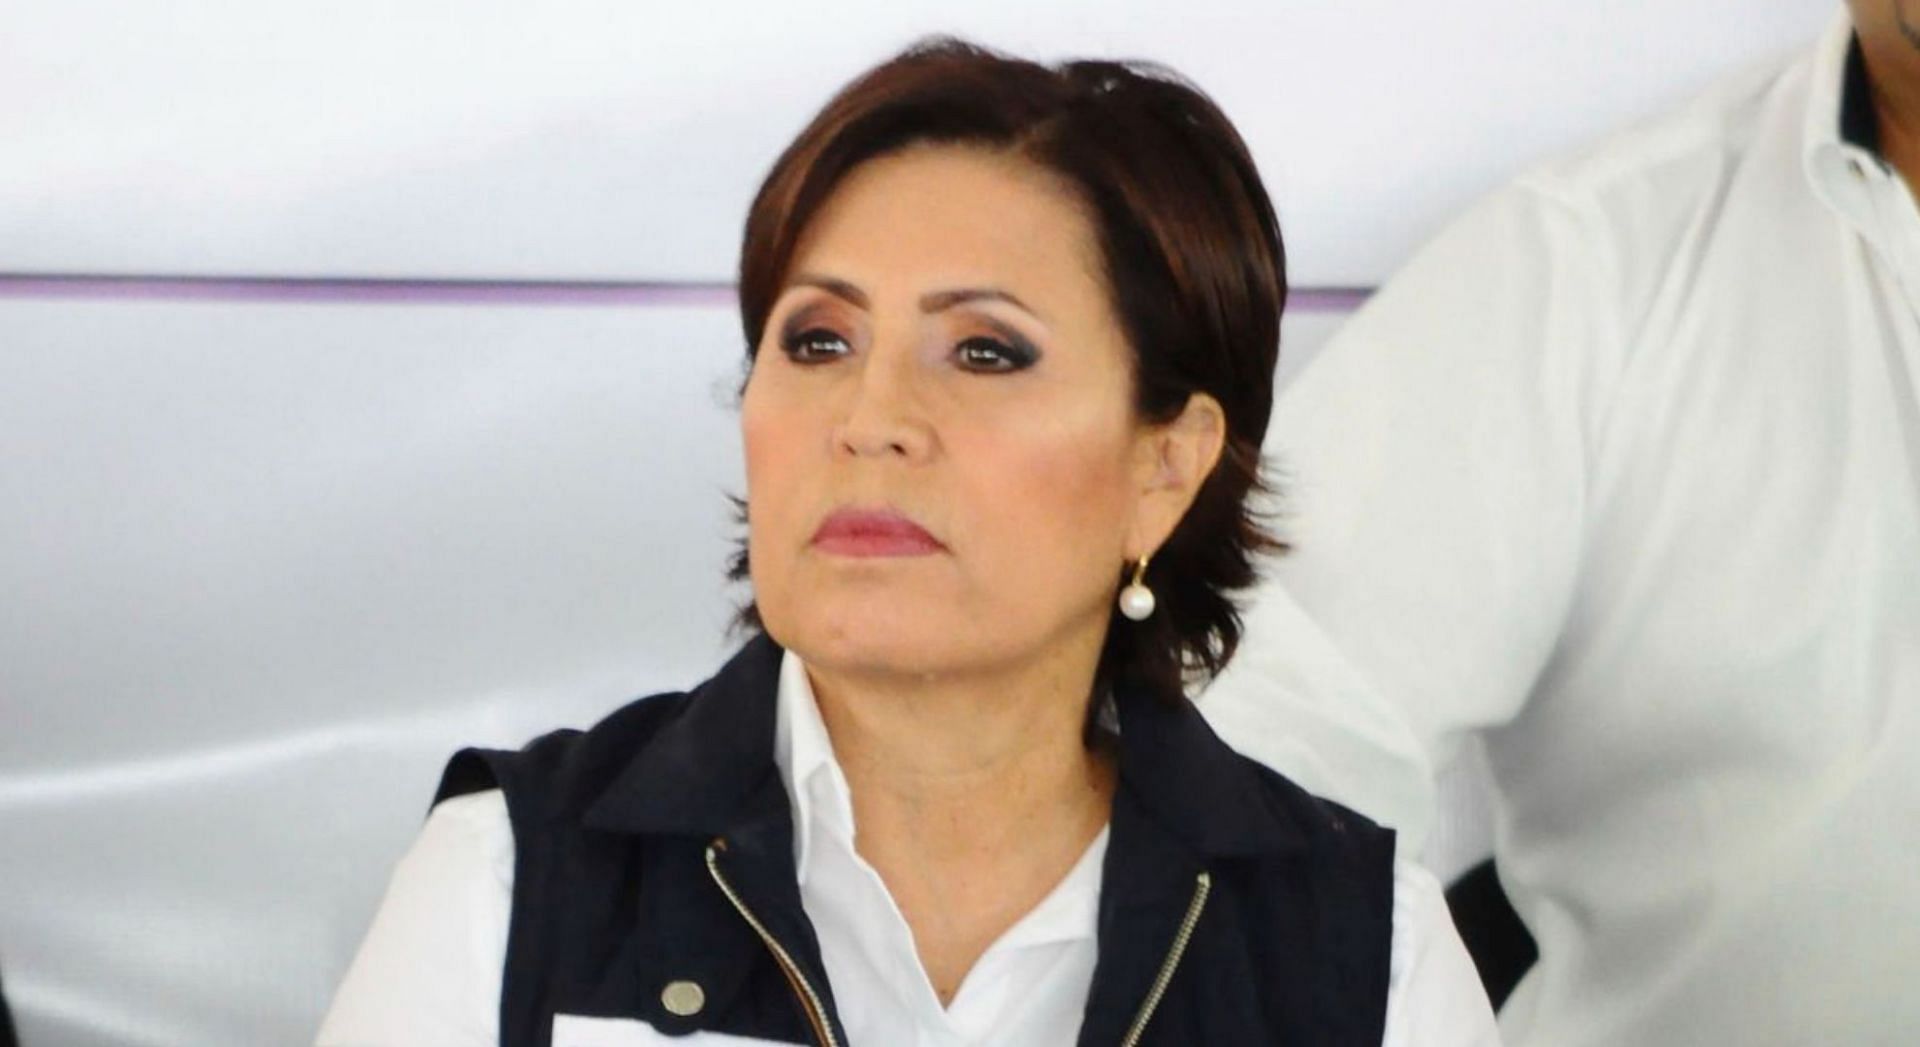 Mexican politician Rosario Robles was released from prison after three years after being arrested for her role in The Master Scam (Image via Getty Images)